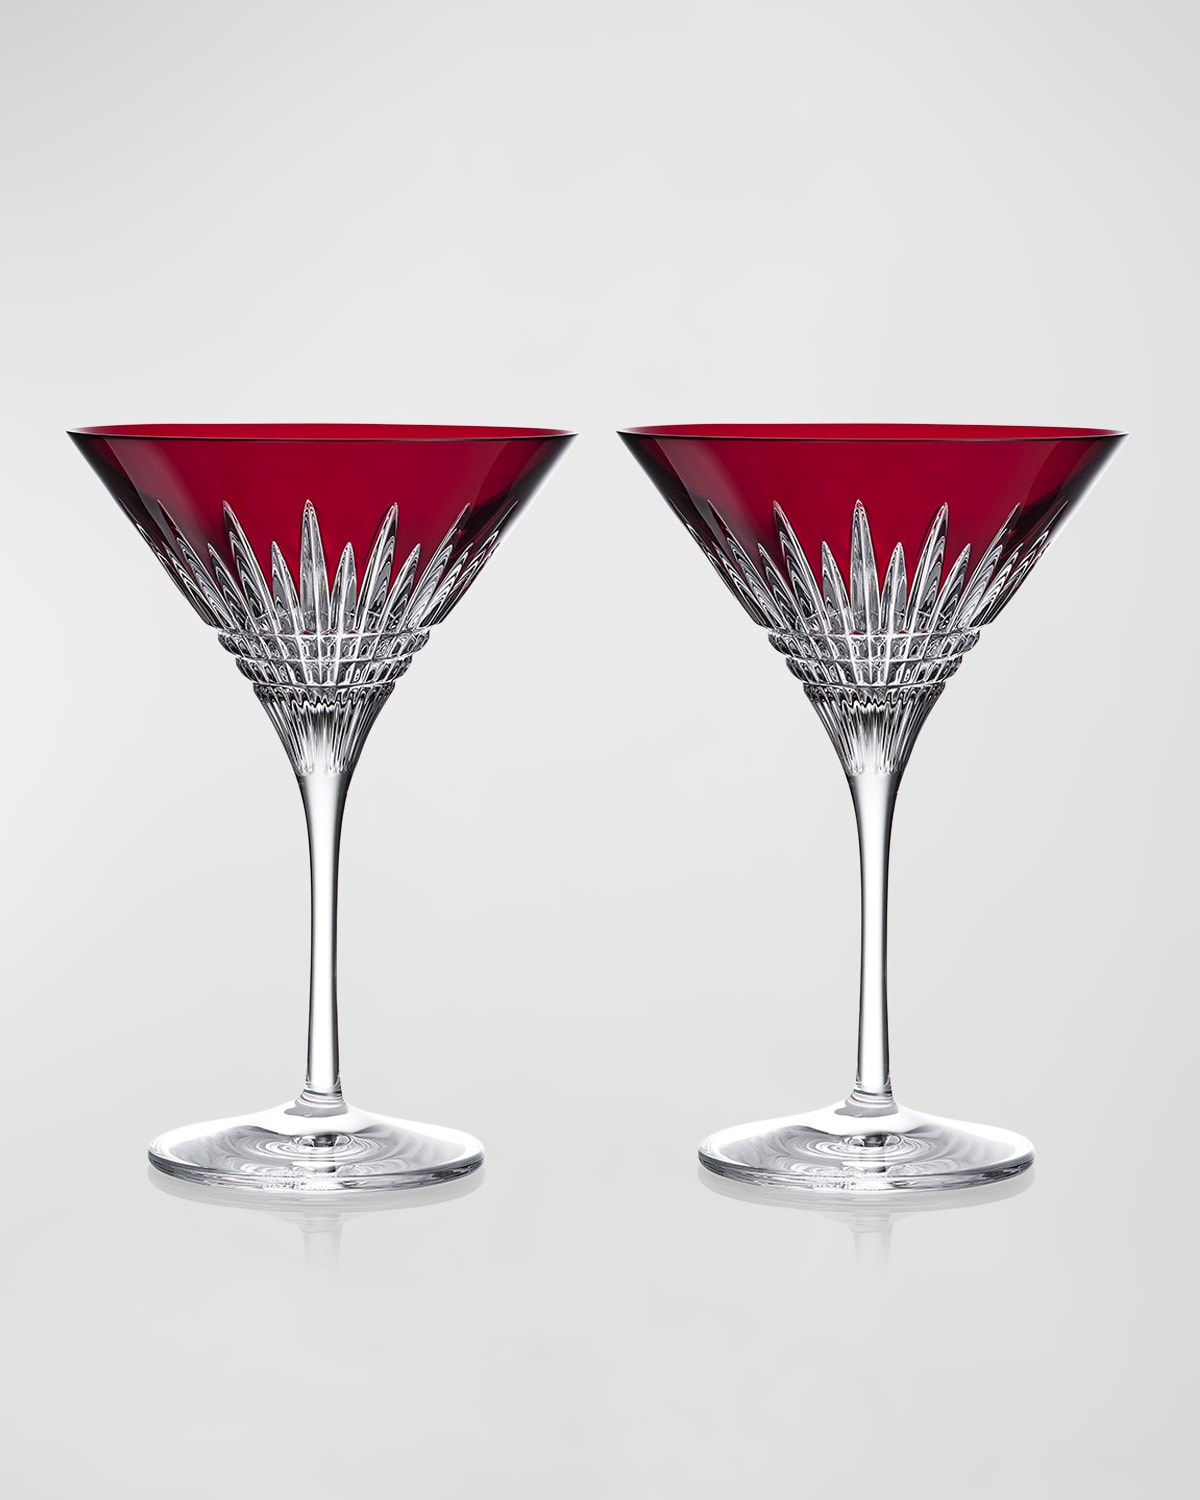 Waterford Crystal New Year Celebration Martini Glass, Red, Set Of 2